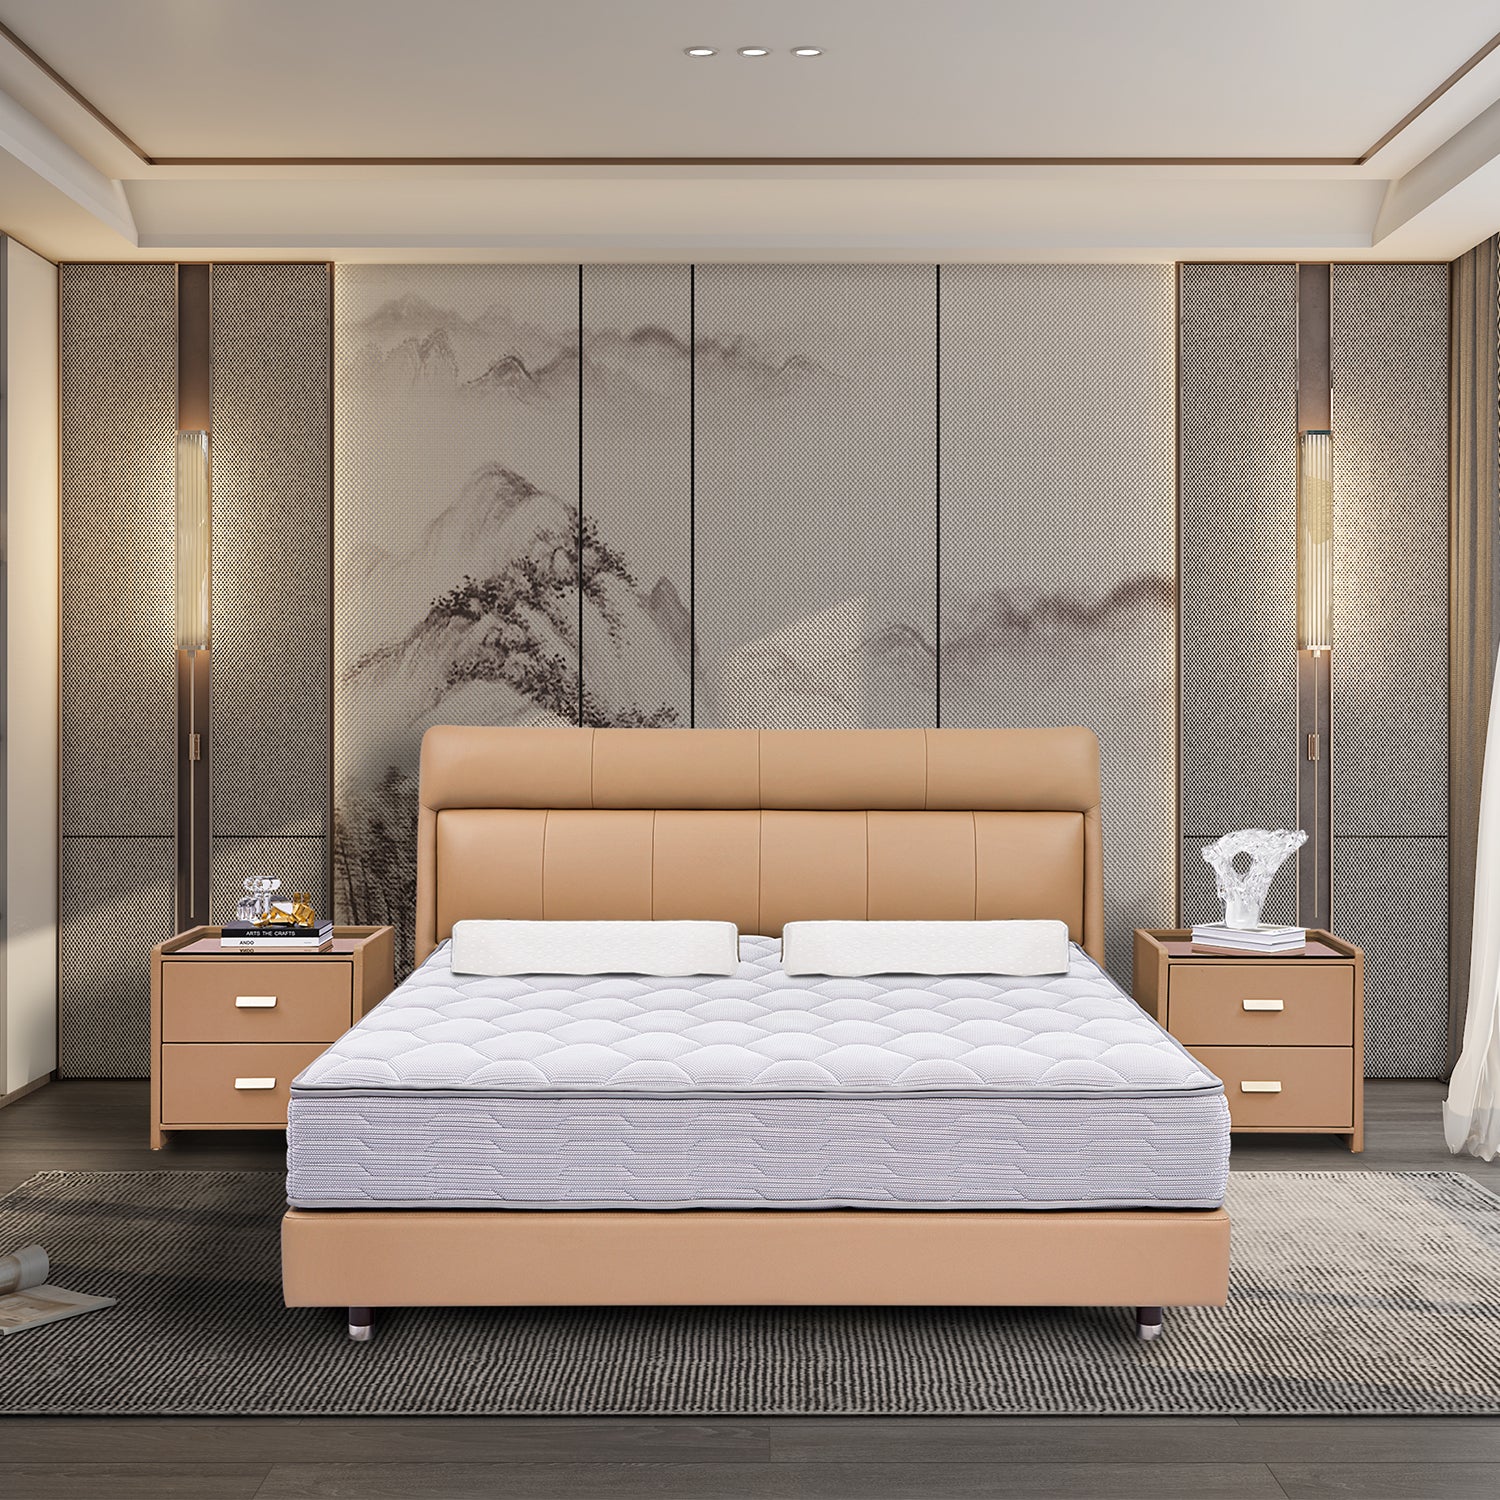 Modern bedroom setup with bed frame BOC1-011, tan upholstered headboard, two side tables with drawers and modern table lamps